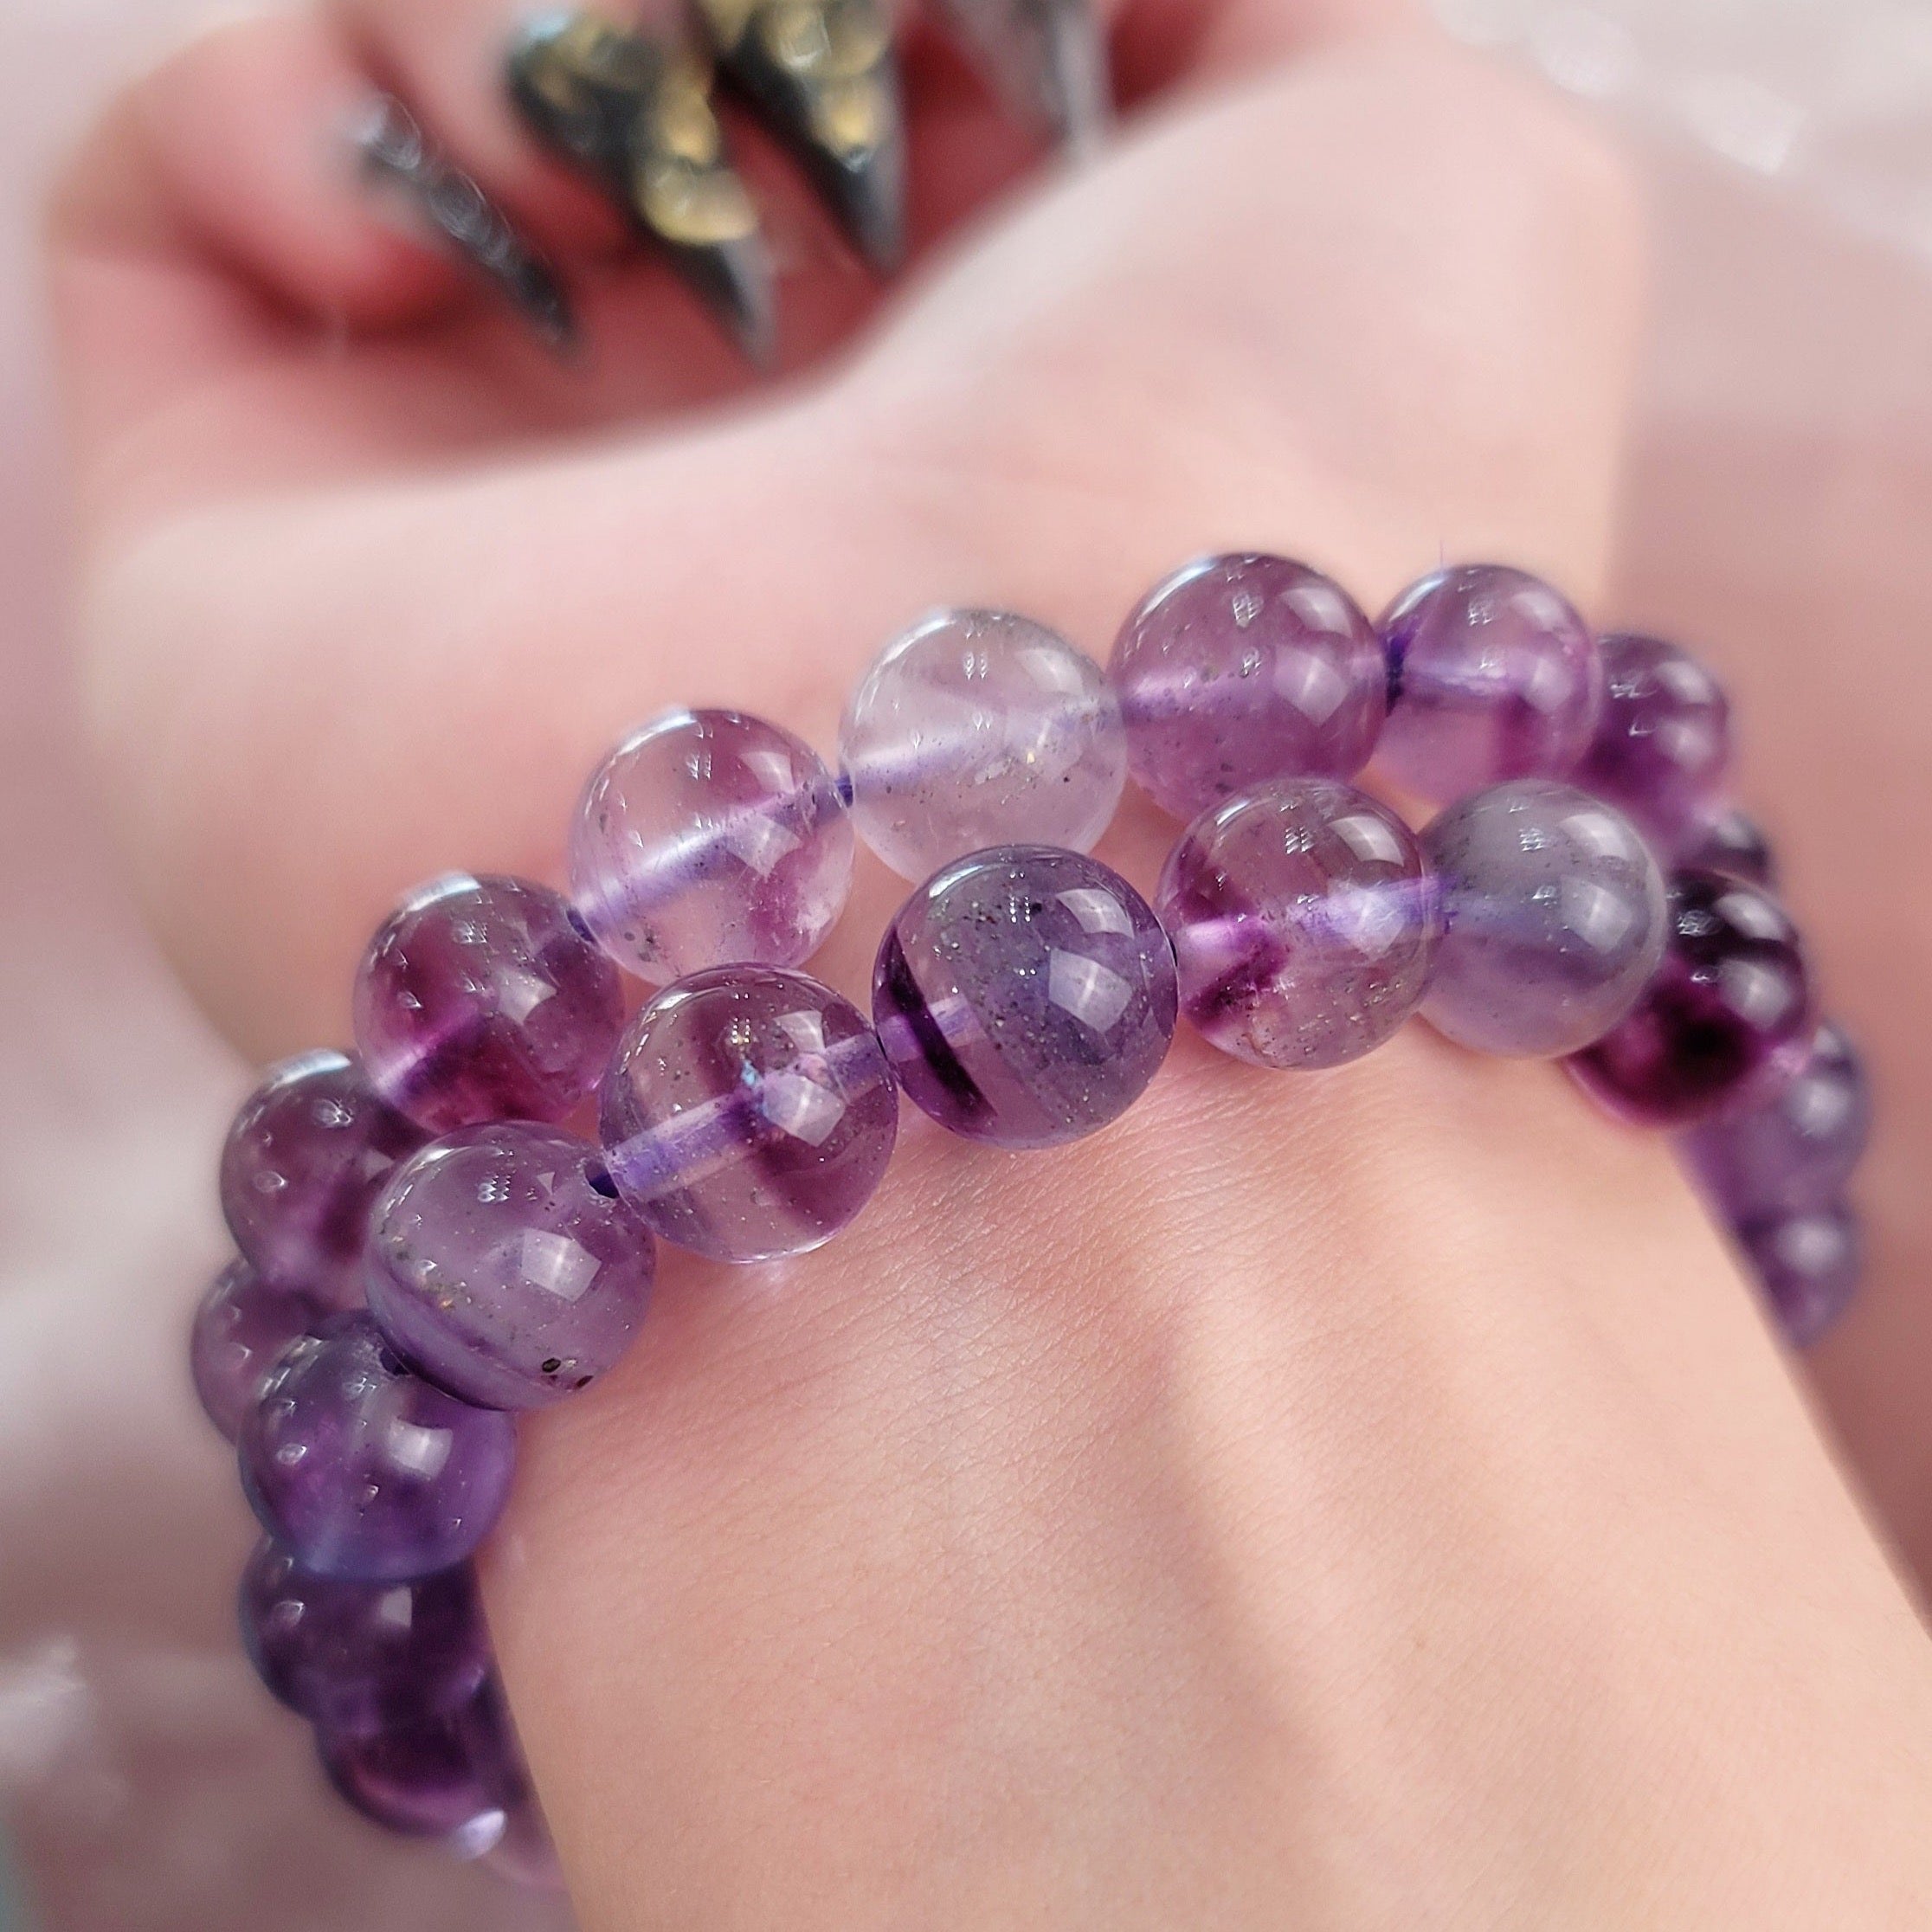 Fluorite with Pyrite Bracelet for Good Luck, Focus and Mental Clarity